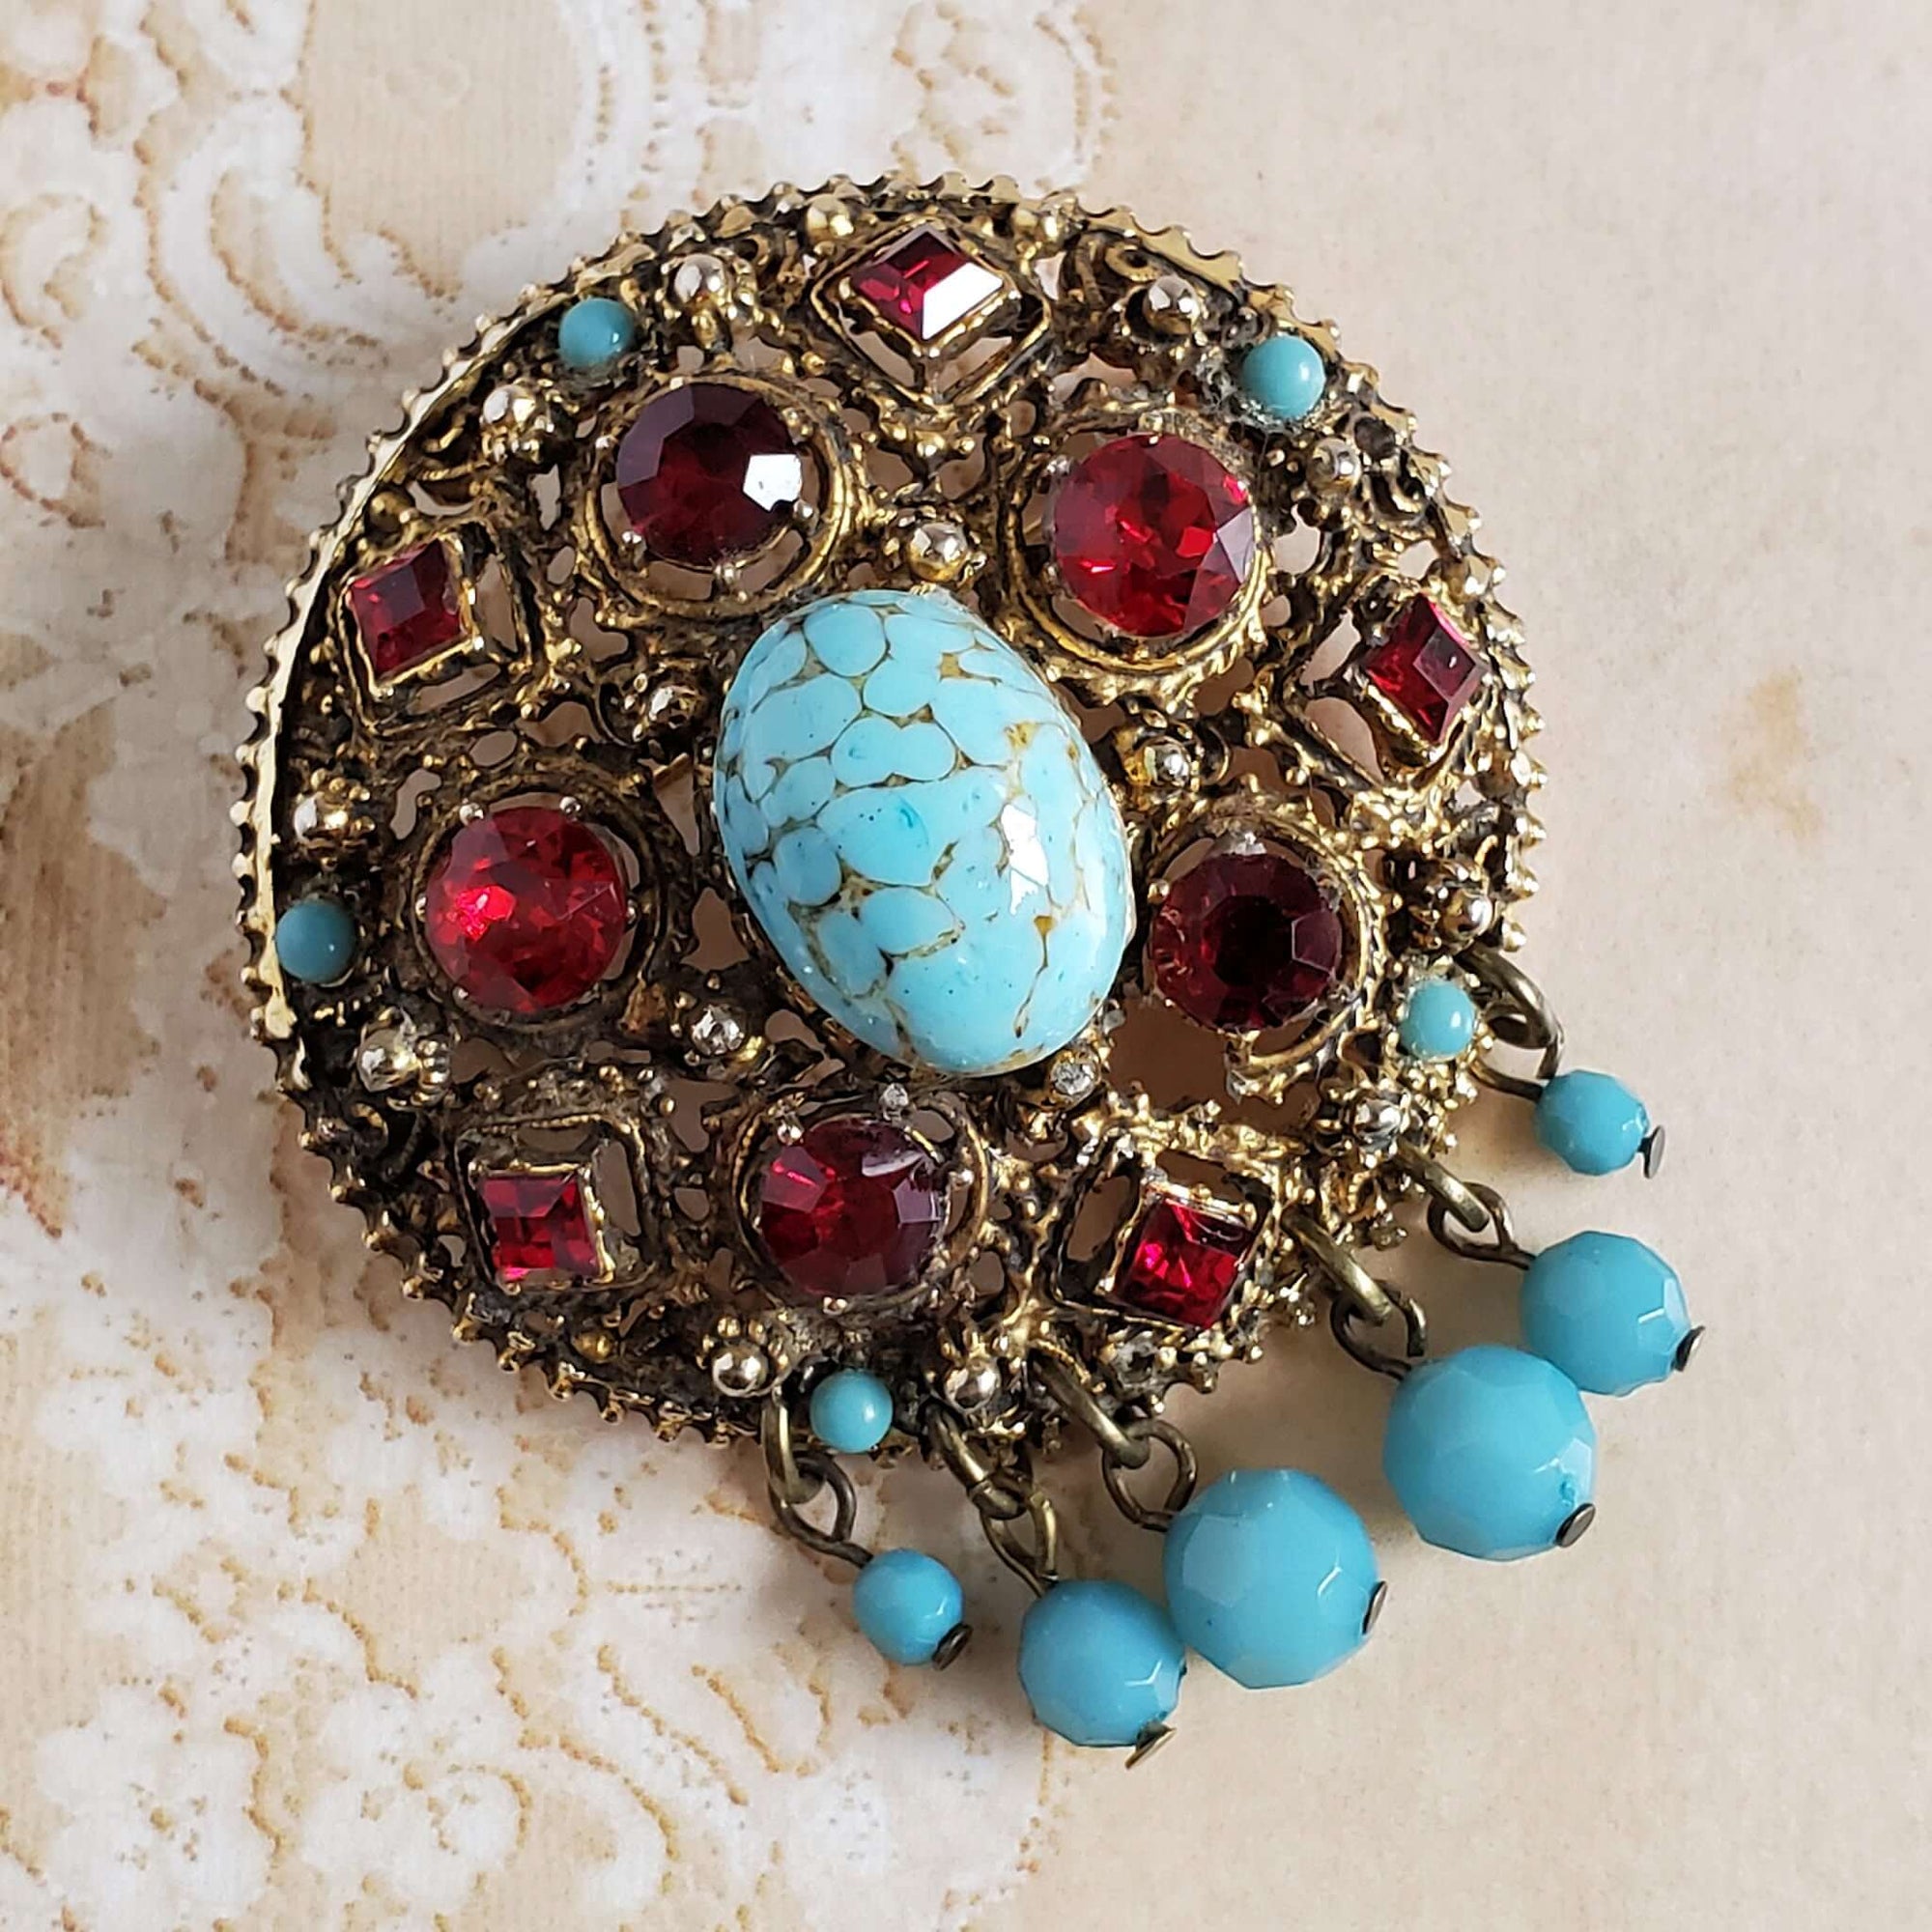 Large Round Antiqued Gold-tone Round Pin with Red Rhinestones and an Imitation Turquoise Center Stone. Turquoise blue beads accent the brooch